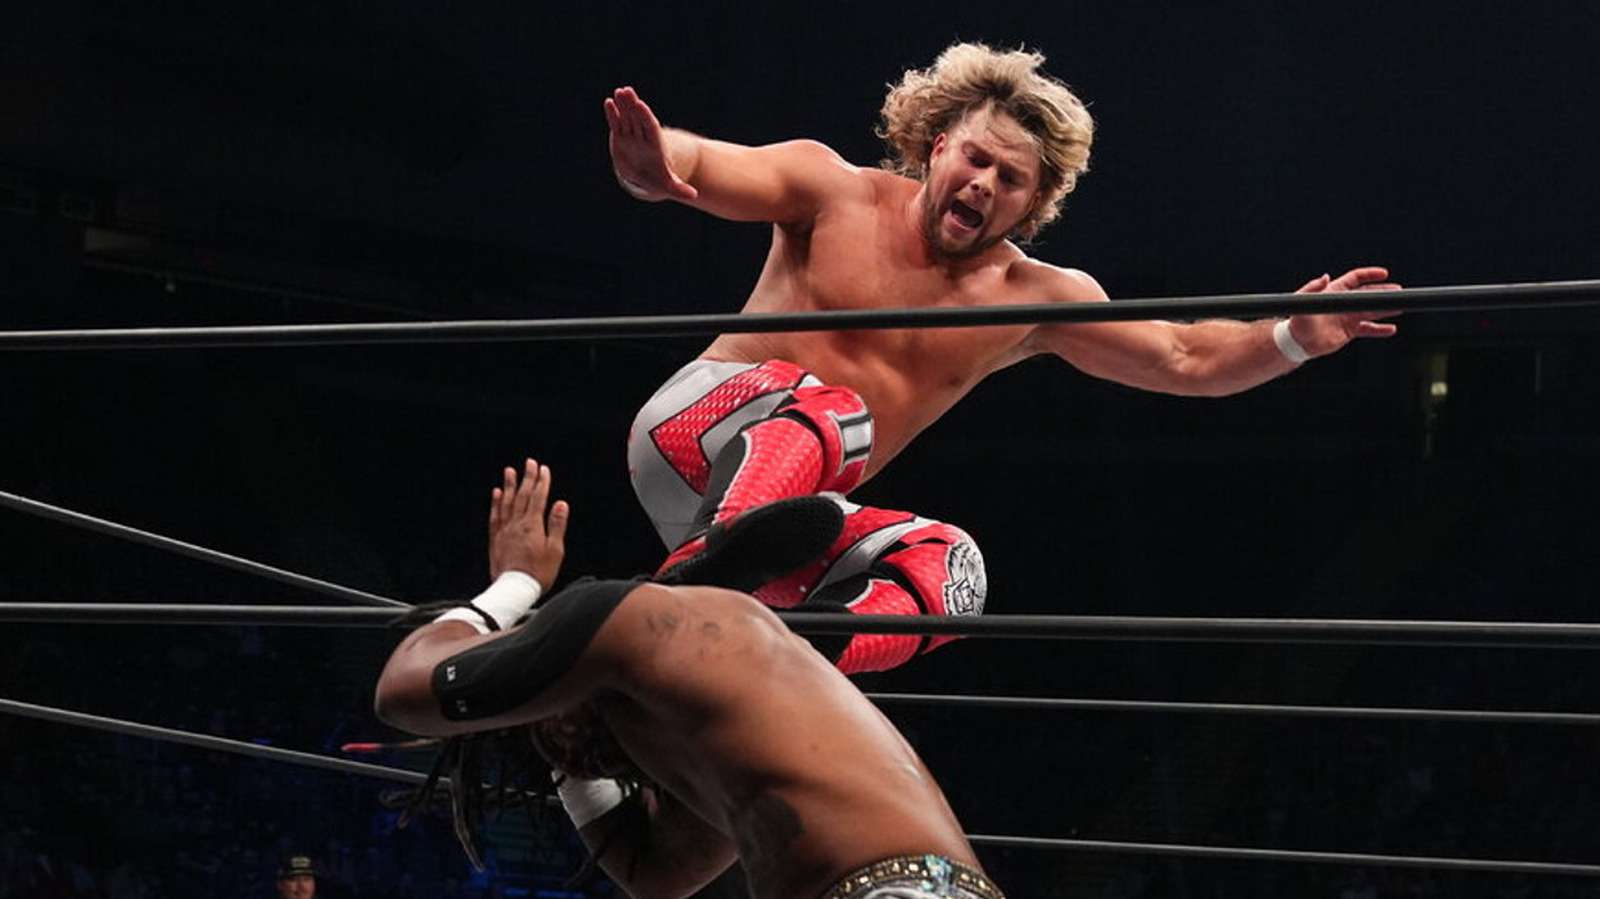 Brian Pillman Jr. states that he has 'huge opportunity' coming up in his  career that's in the works